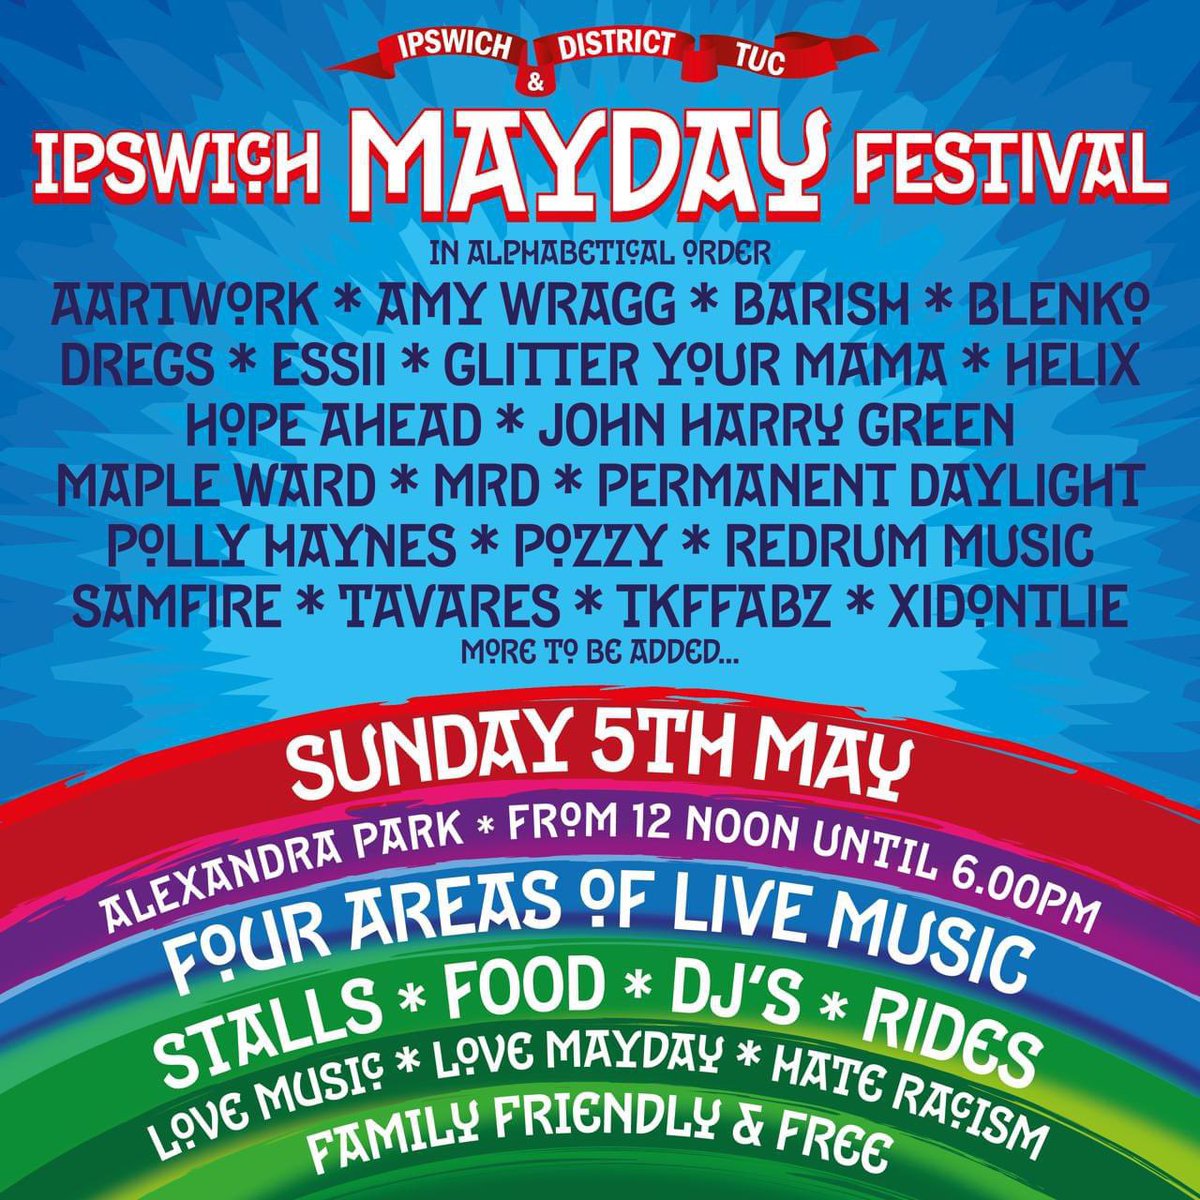 Today’s the day! #IpswichMayDay #MayDayFest